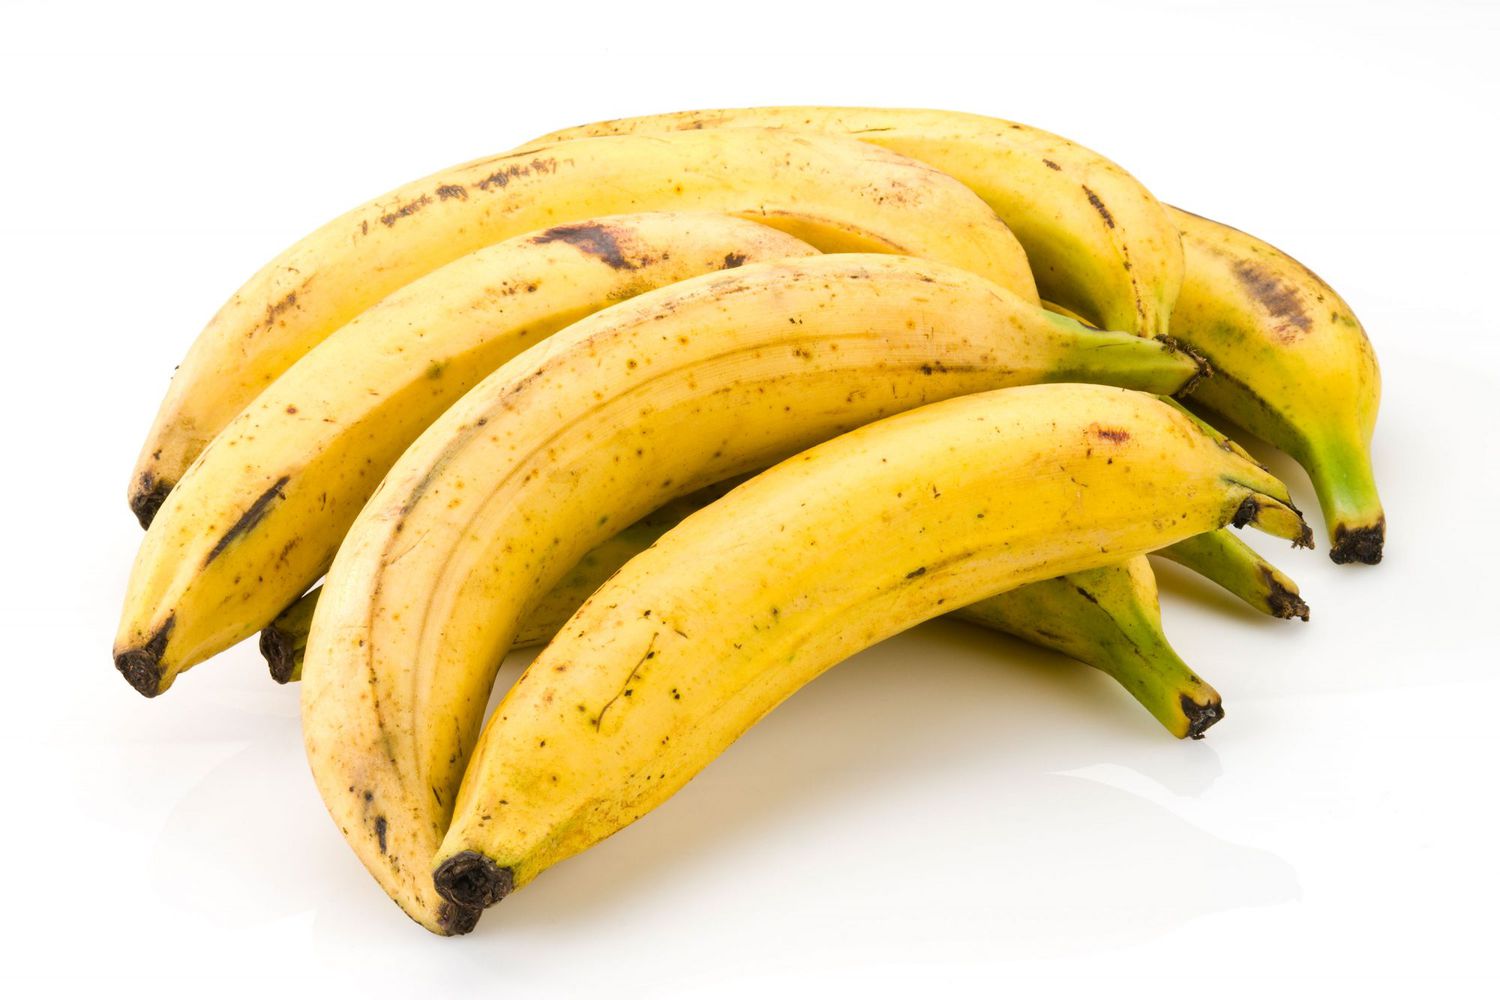 How To Store Plantains